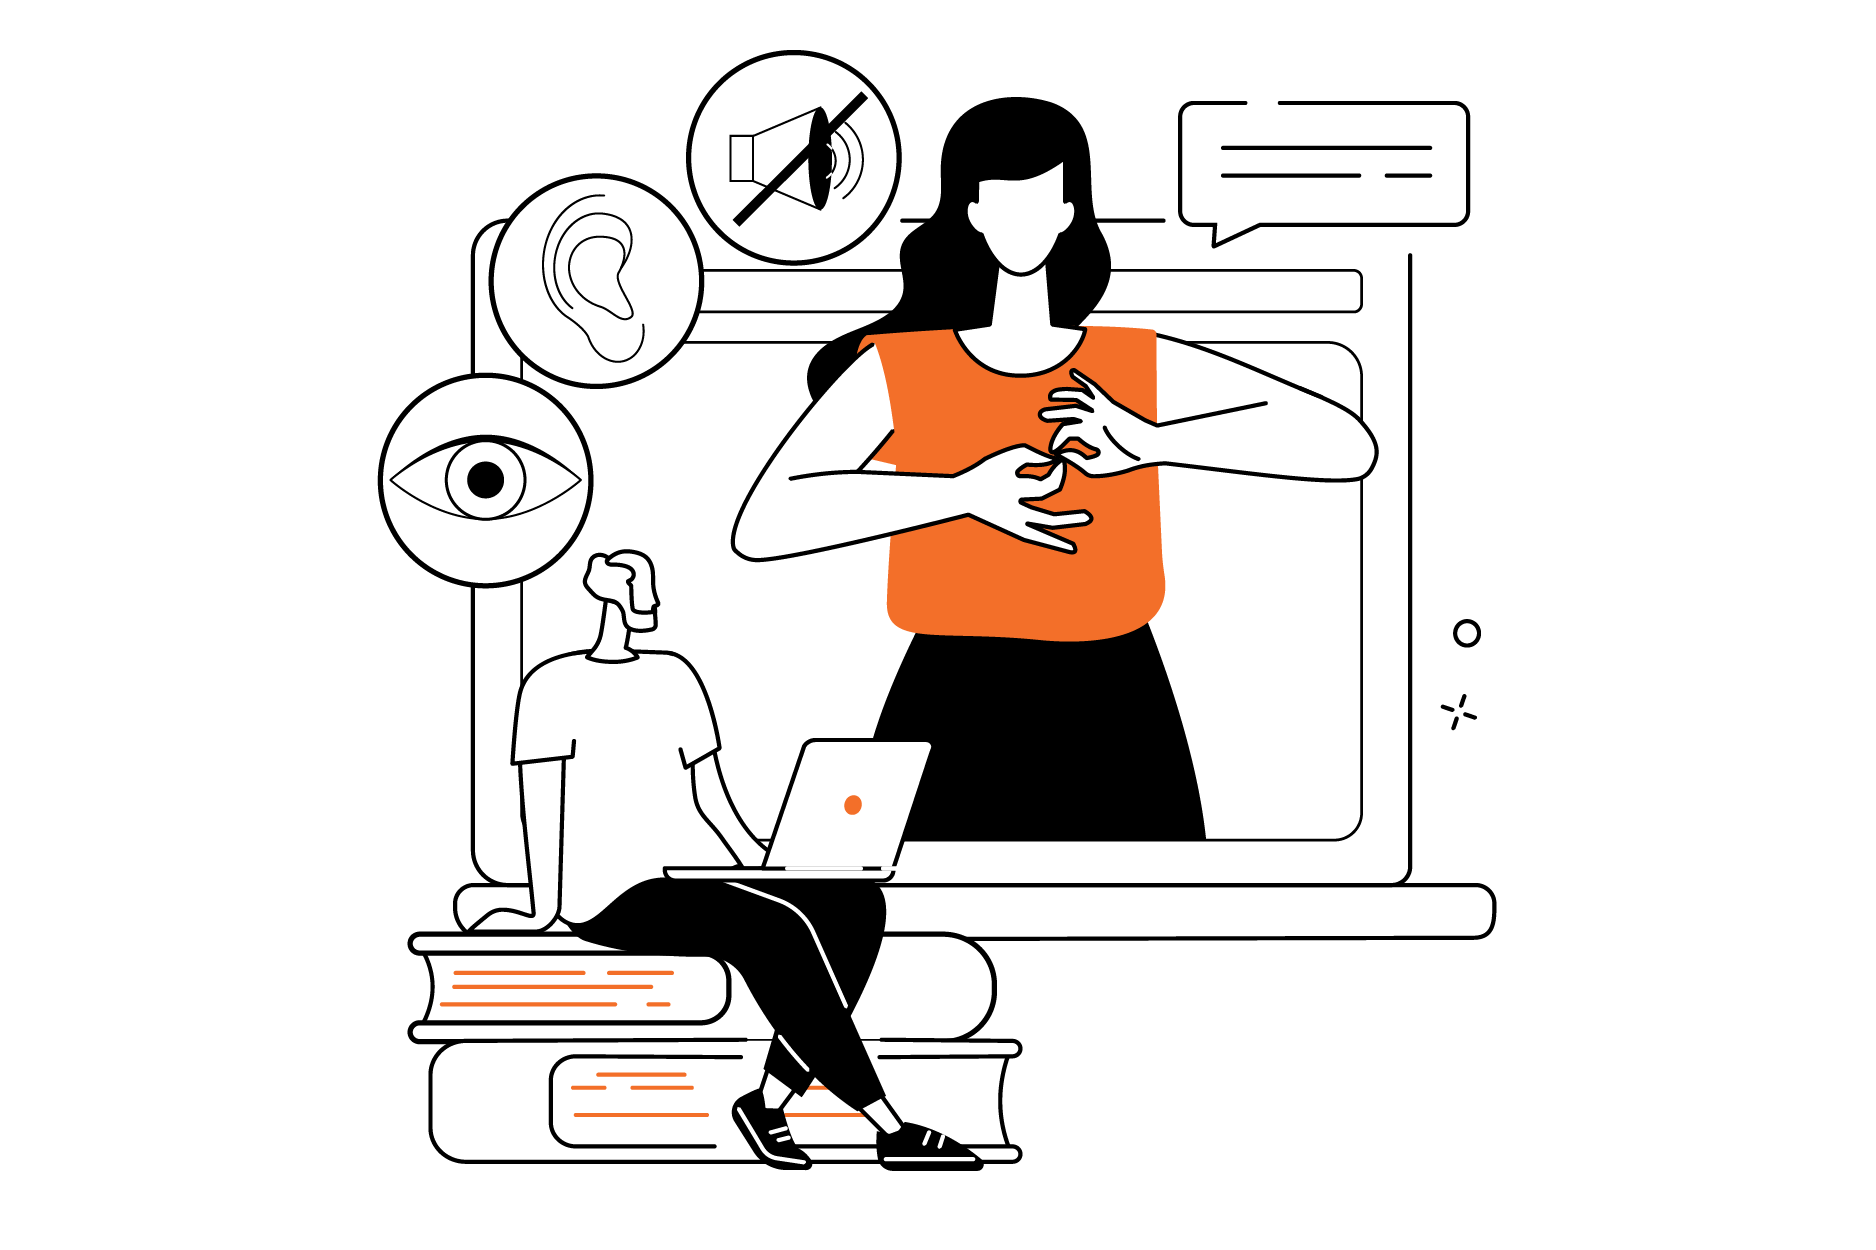 An illustration showing a computer screen with a woman delivering sign language. A man sits in front of a computer looking at the screen. There are 3 icons above him showing an eye for vision, and ear for hearing, and a muted volume symbol.